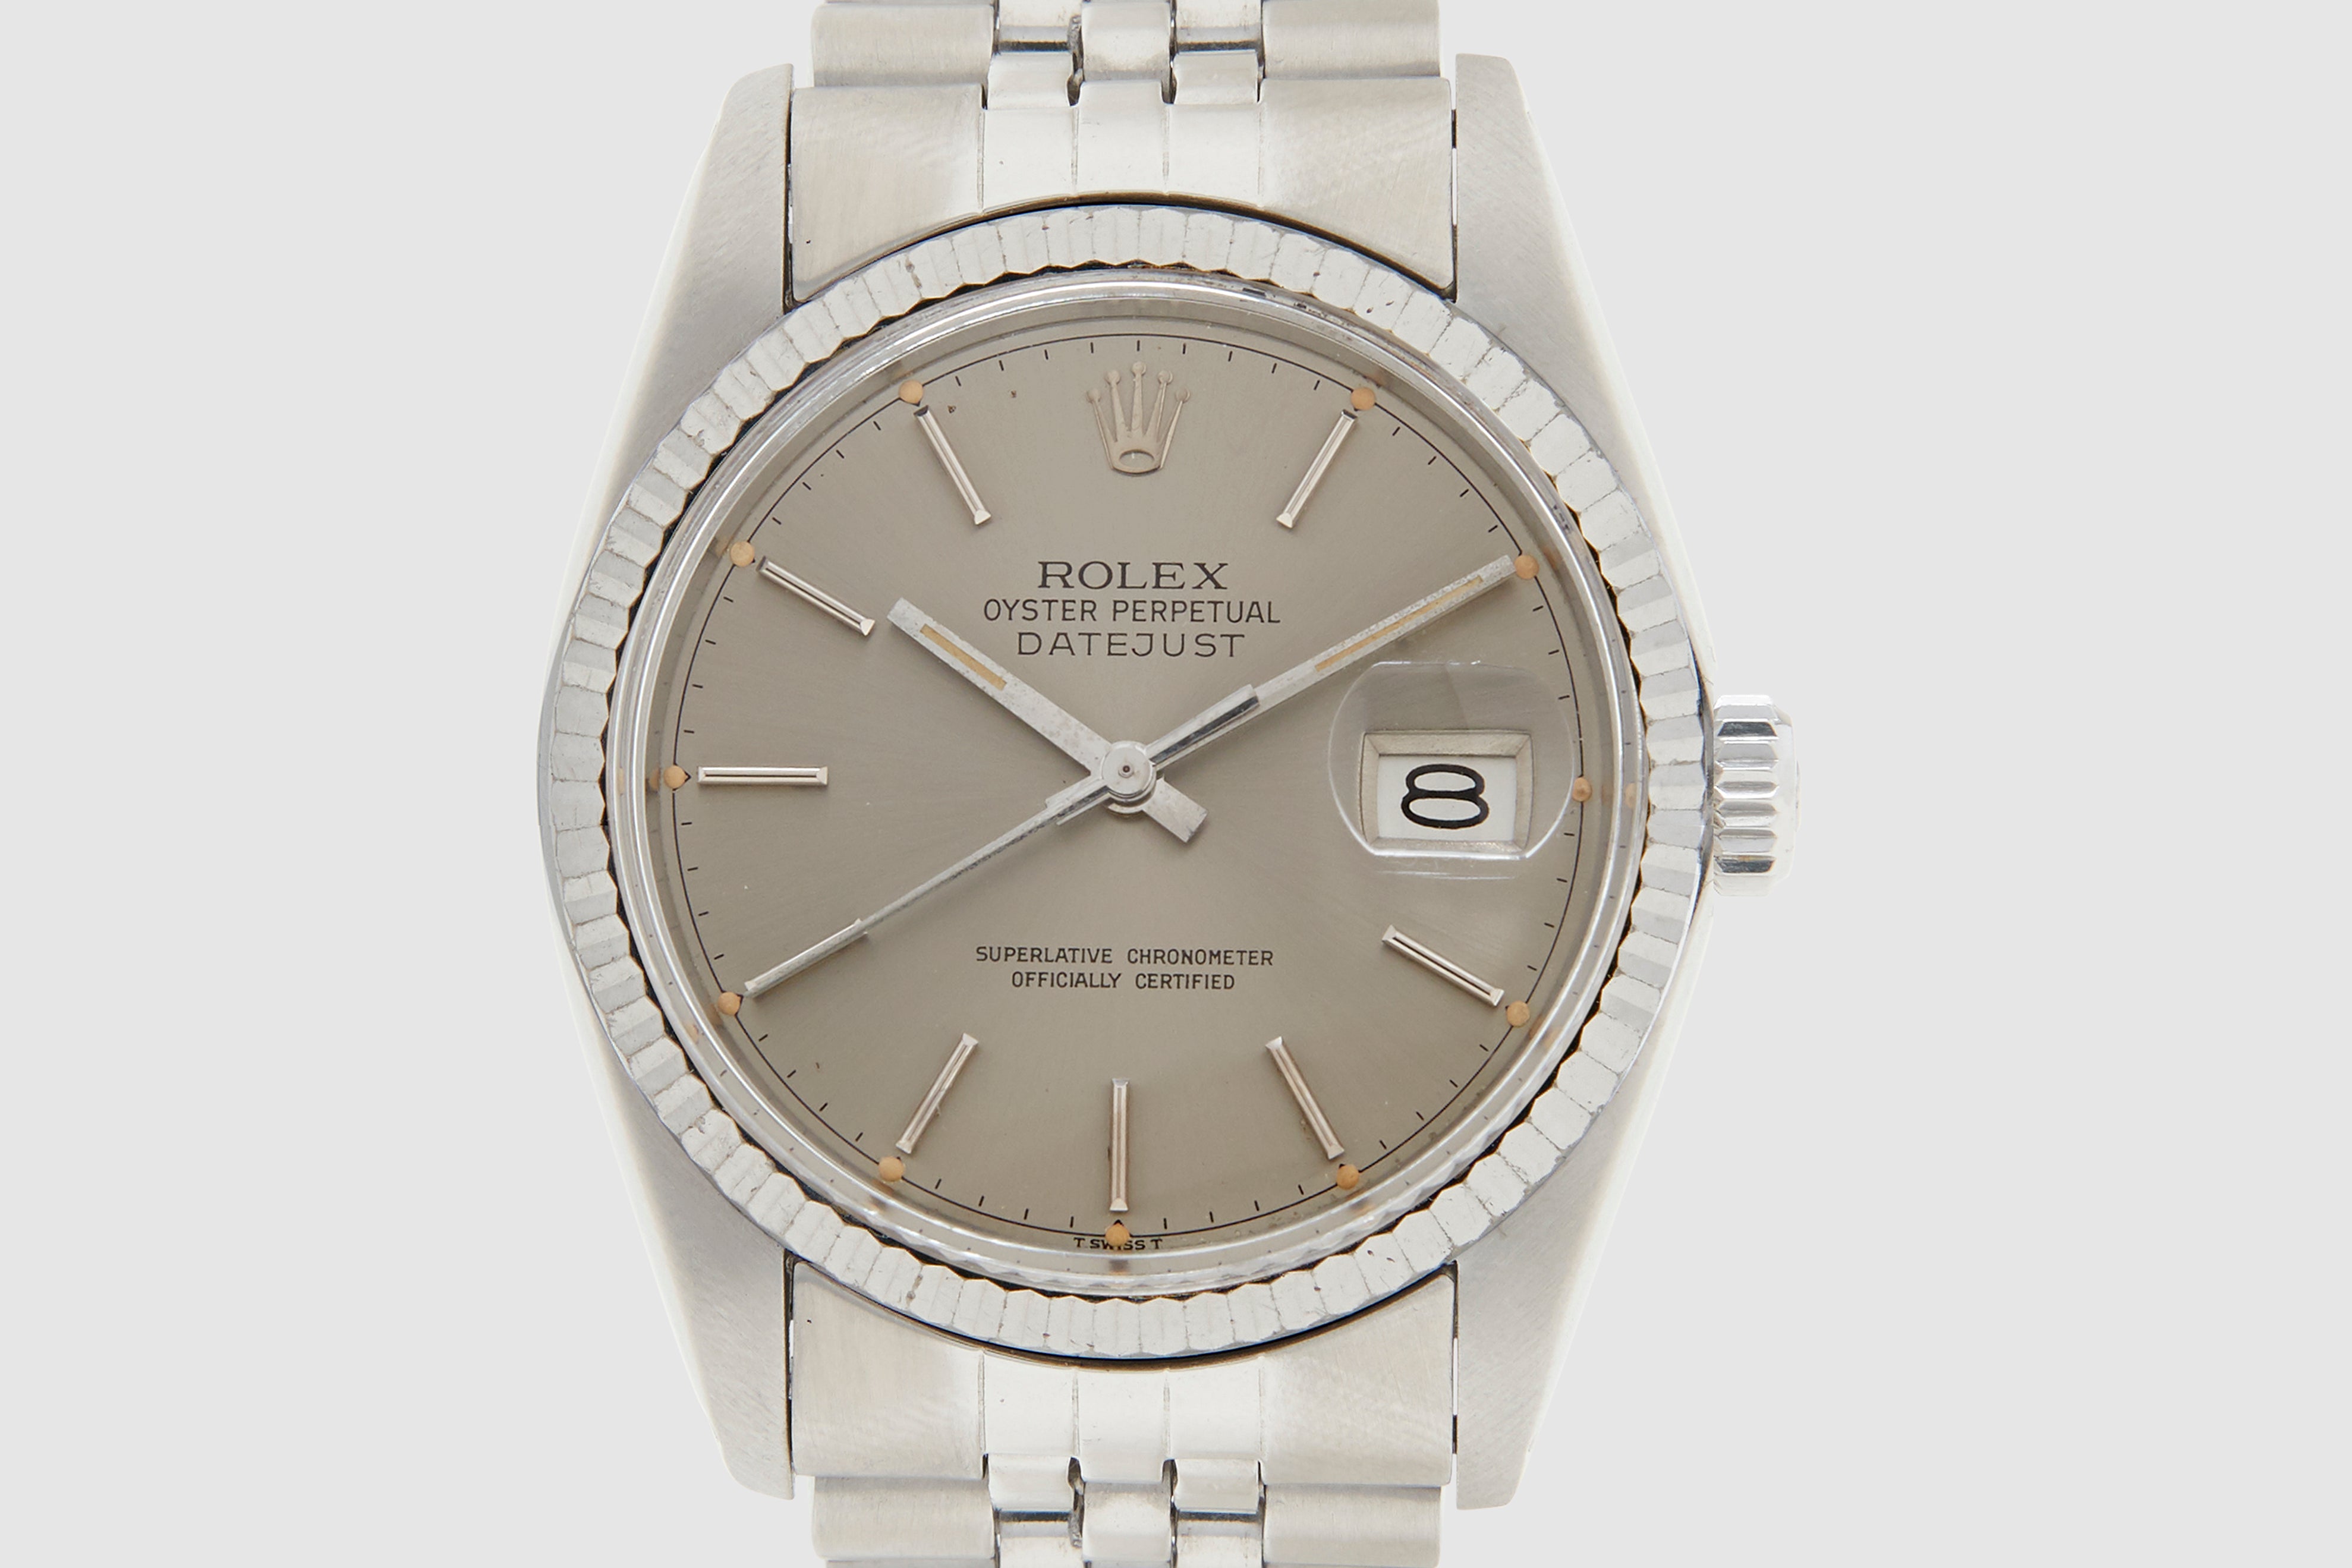 Rolex Oyster Perpetual Datejust Full Set 1979